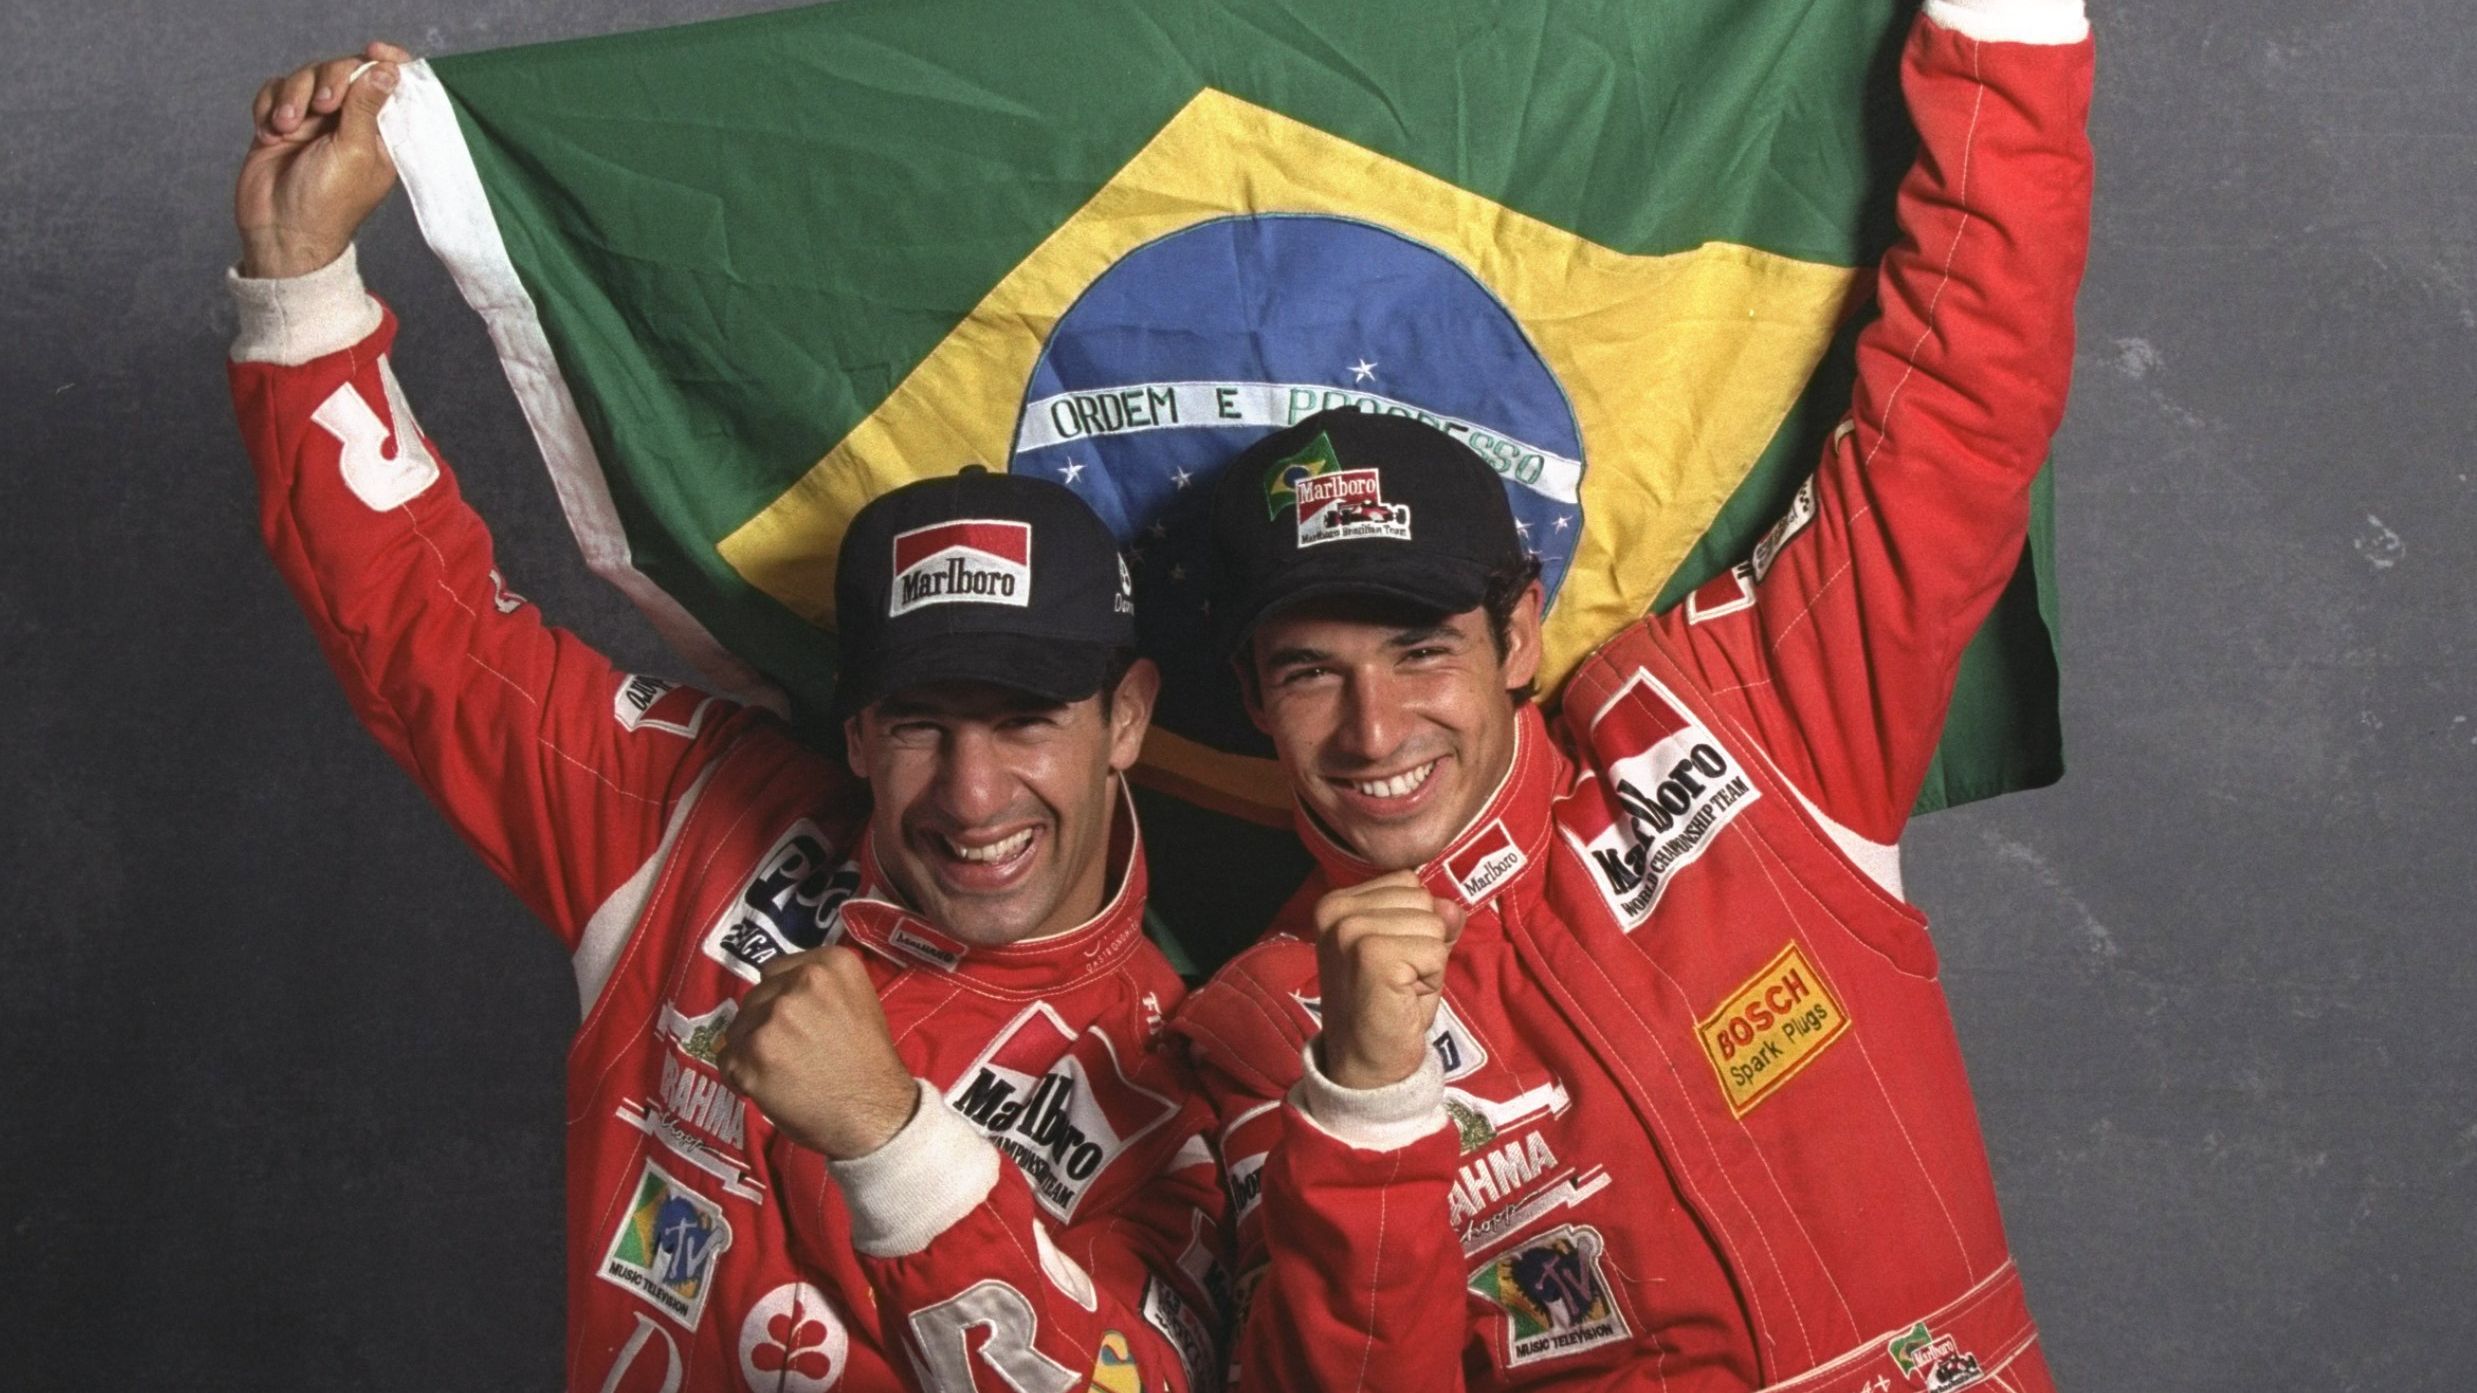 Tony Kanaan and Helio Castro Neves were teammates in 1996 and 1997 in the Indy Lights Series with Tasman Motorsports.